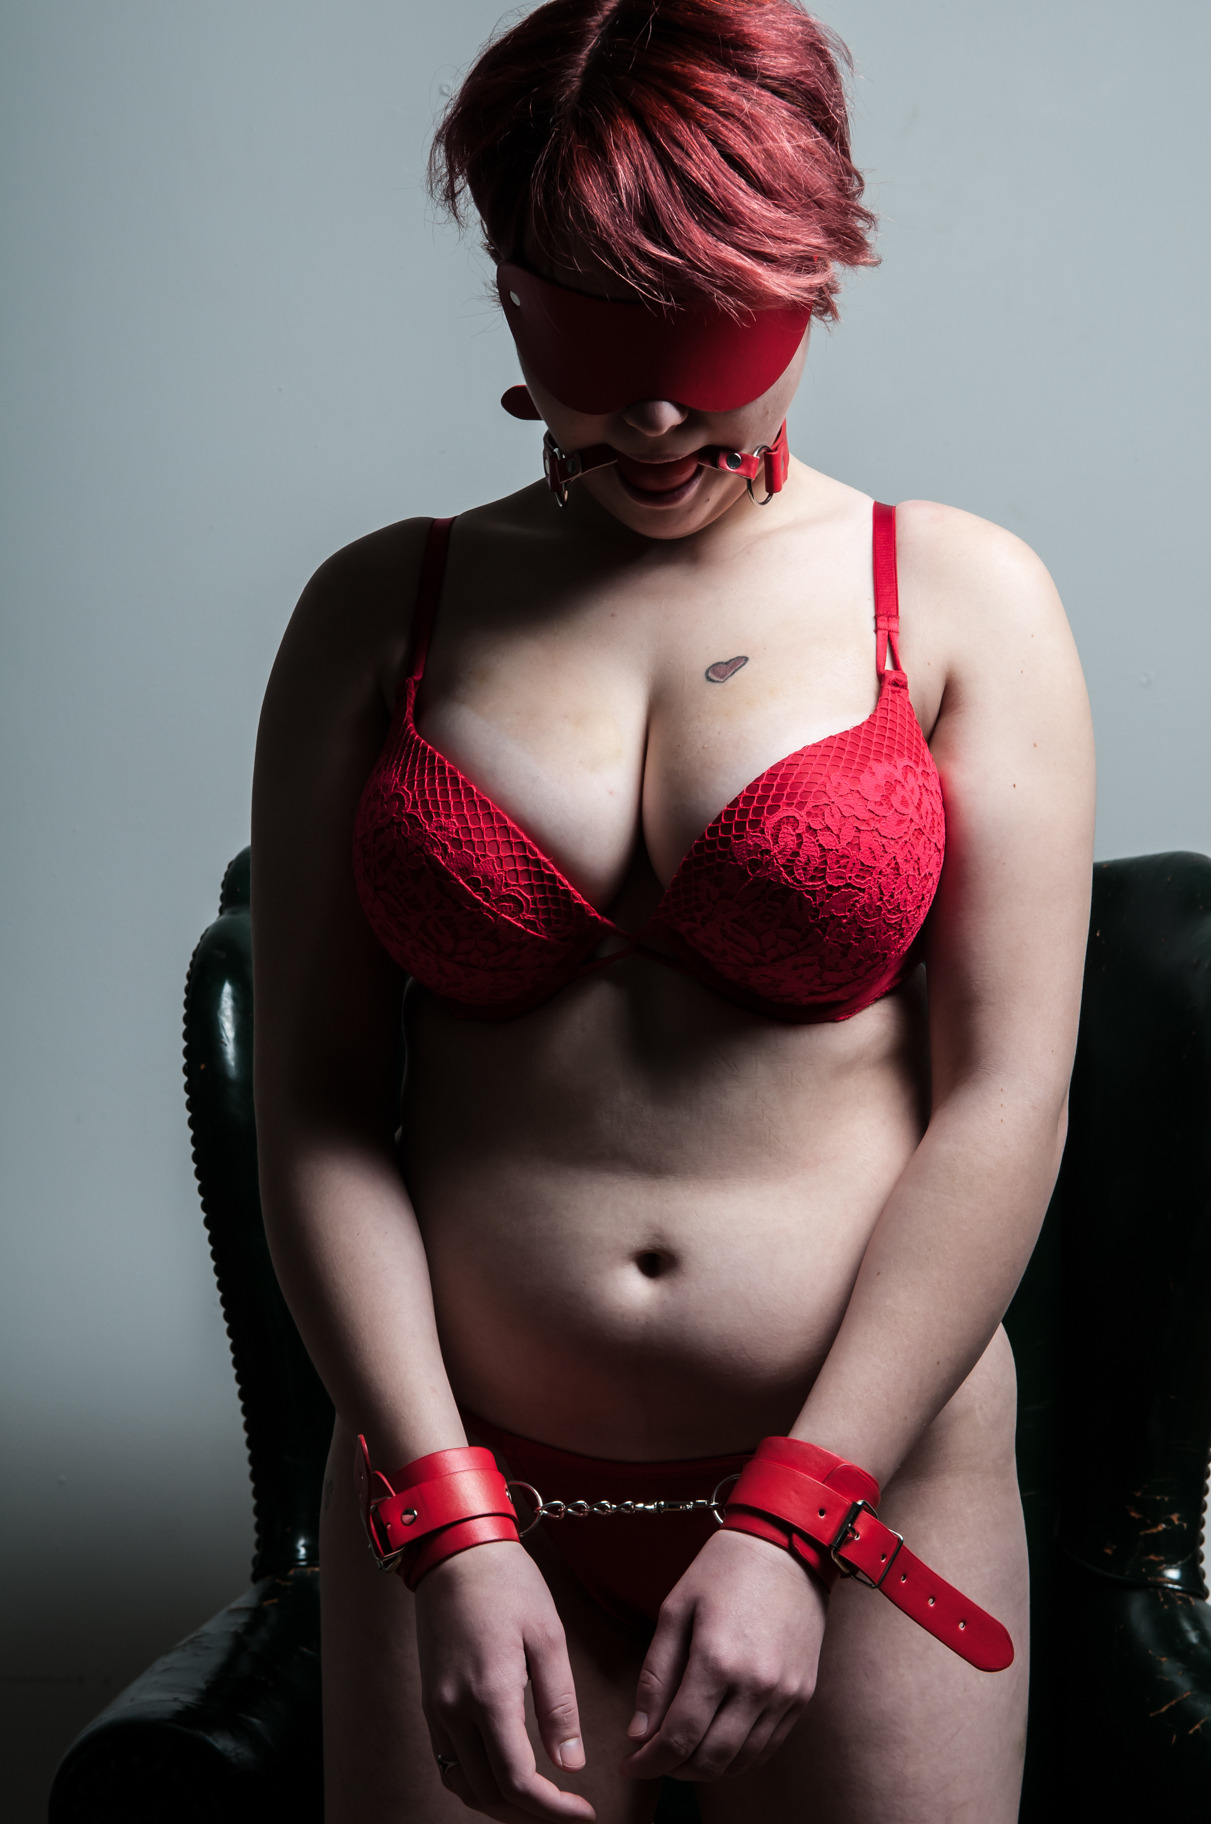 Tie me up…bind me…blindfold me…gag me…use me and fuck me however you please.